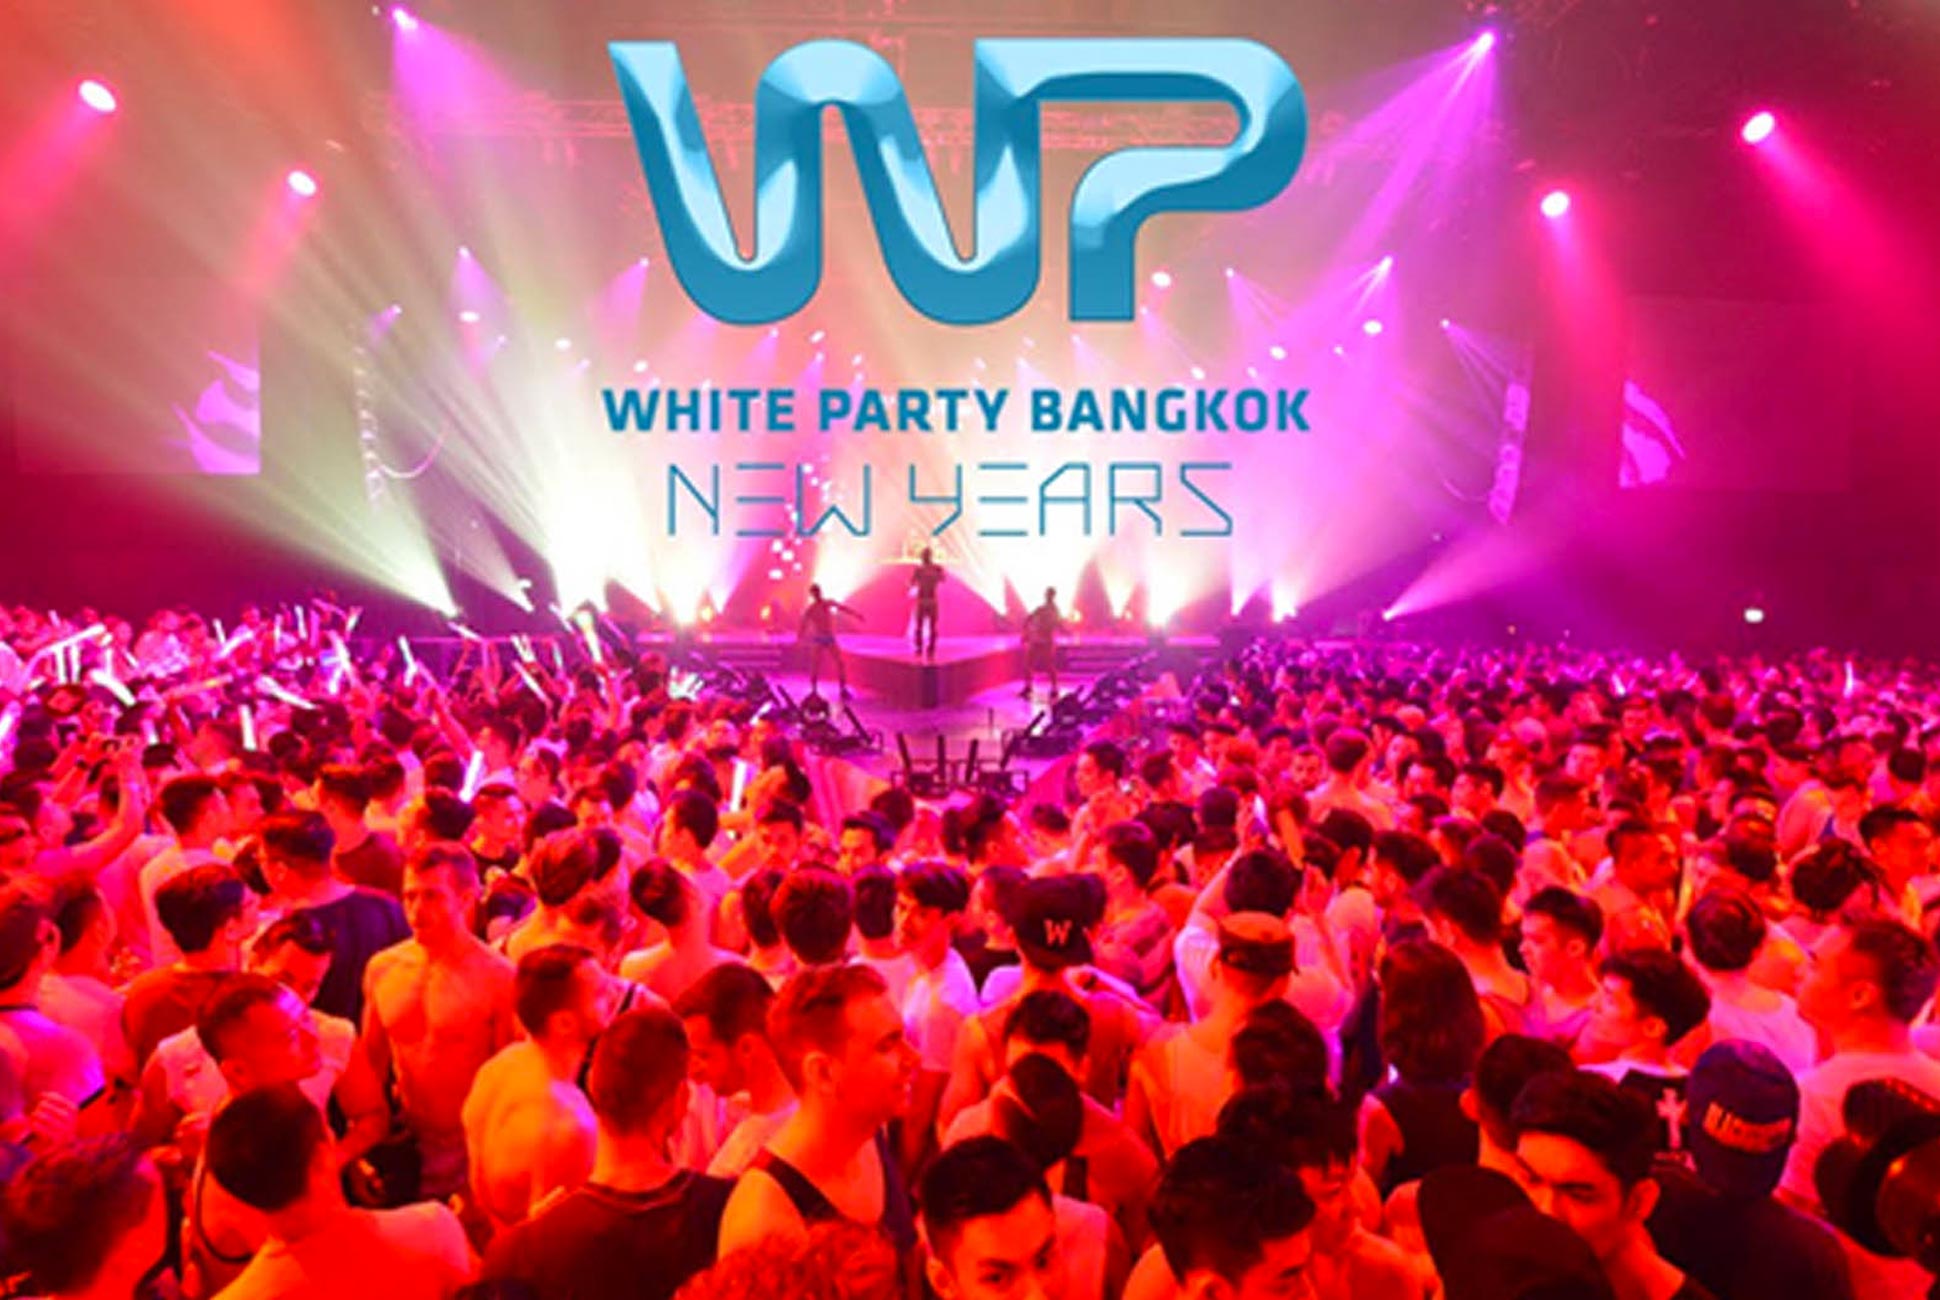 White Party (WP), launched in Bangkok, Thailand, in 2015 with 4 massive par...